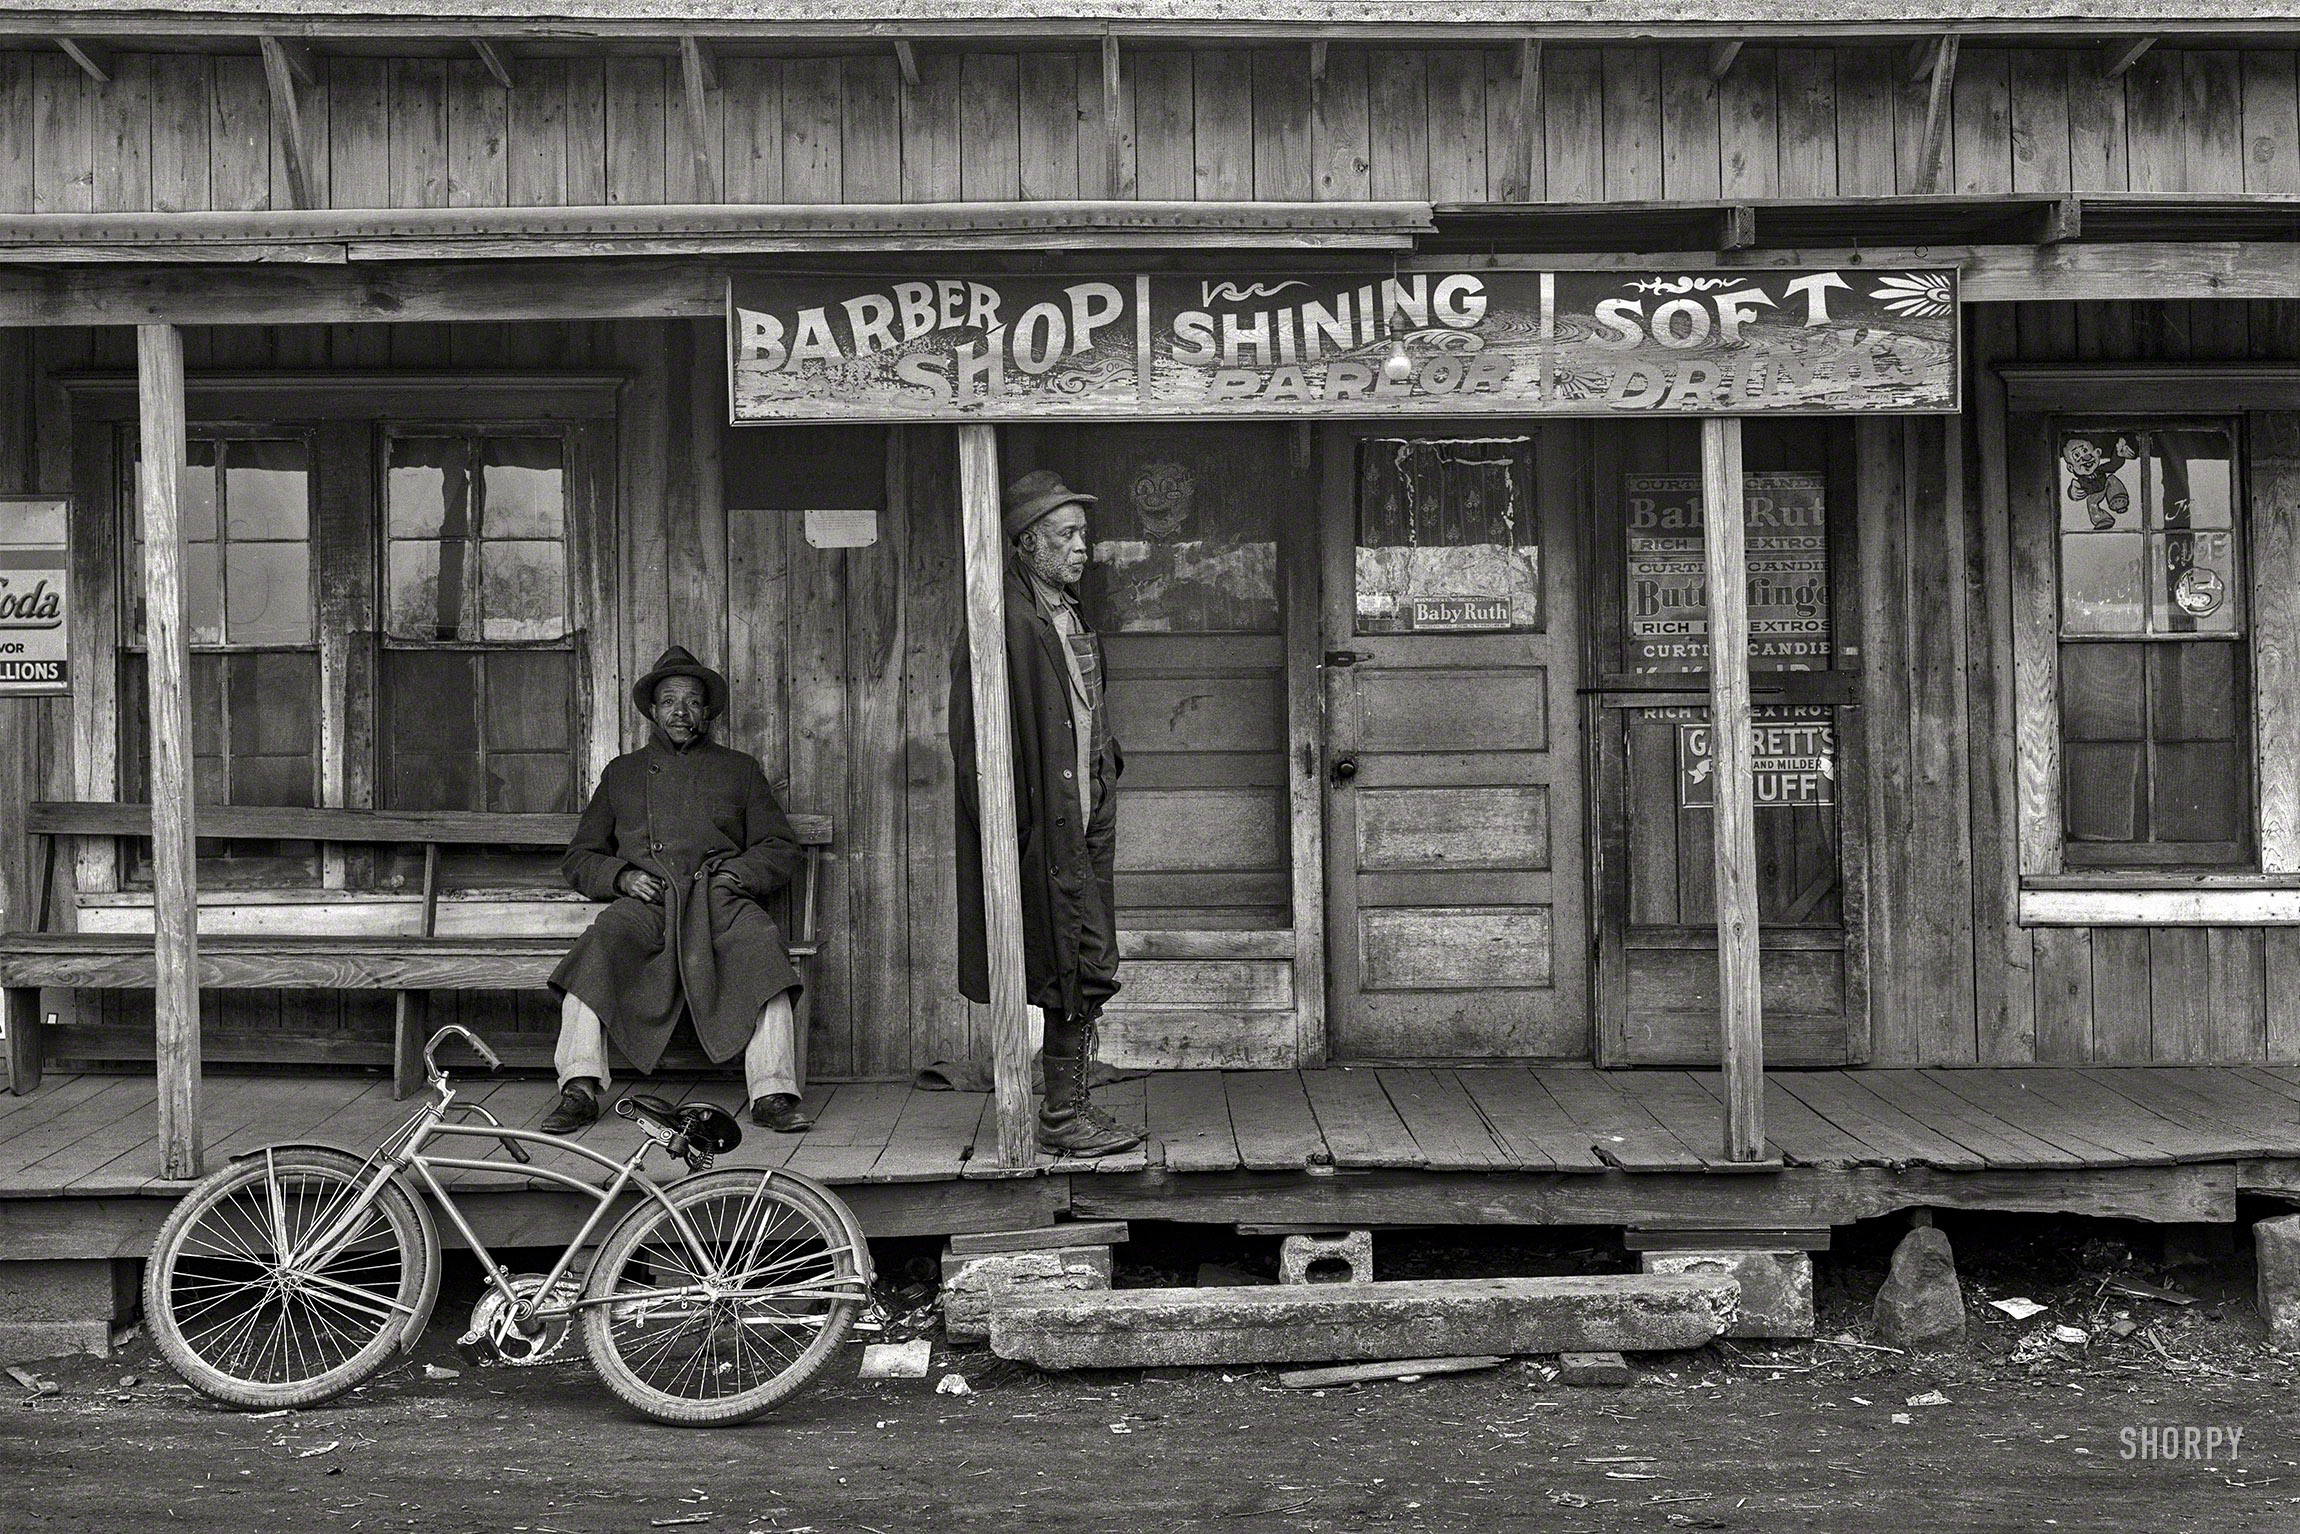 January 1939. "Coal miner in business center of Colp, Illinois." Acetate negative by Arthur Rothstein for the Farm Security Administration. View full size.